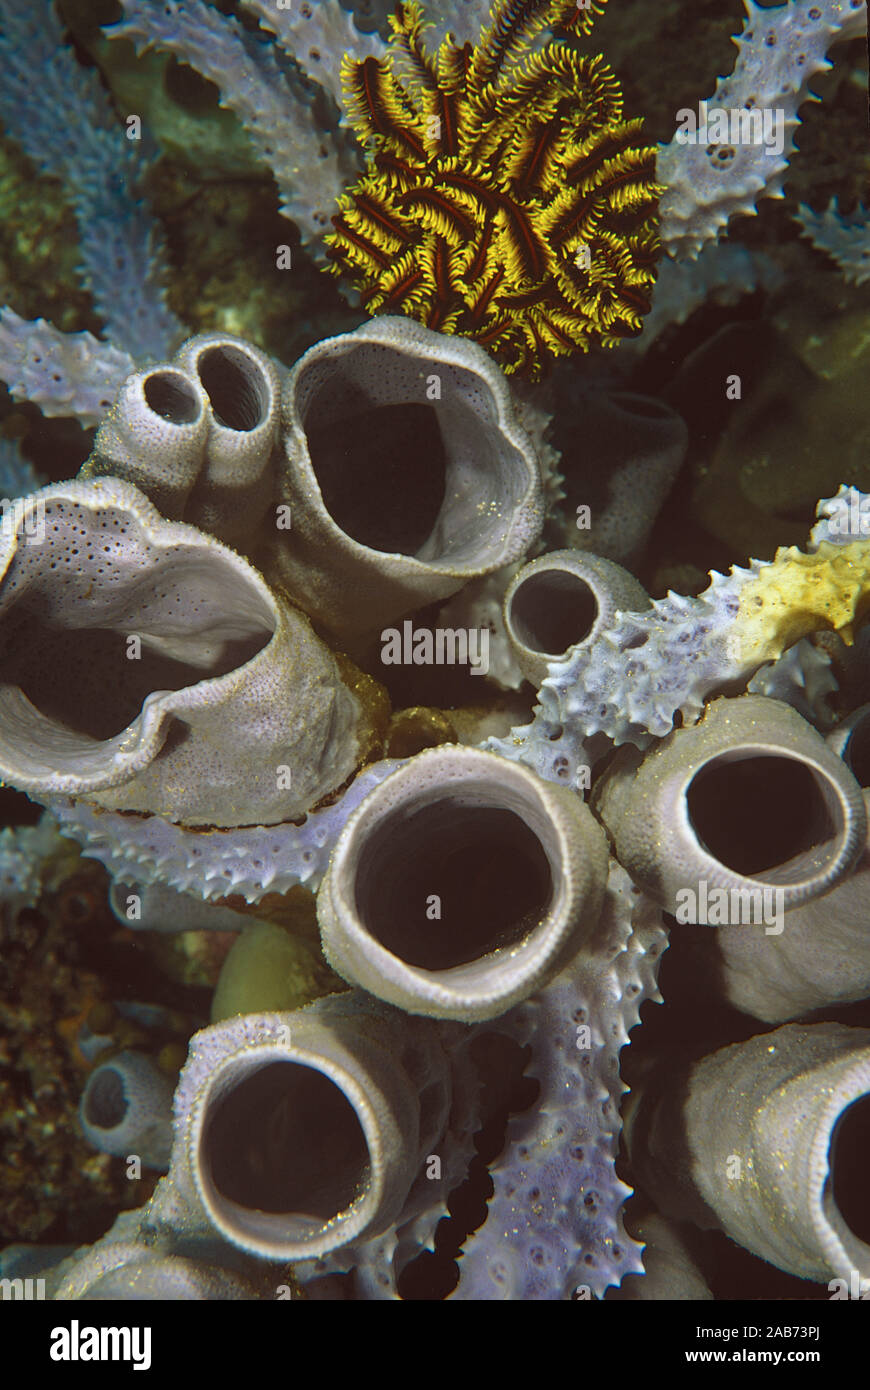 Sponge (Amphimedon sp.), The tubular canals are home to a variety of invertebrate animals. Ambon, Indonesia Stock Photo